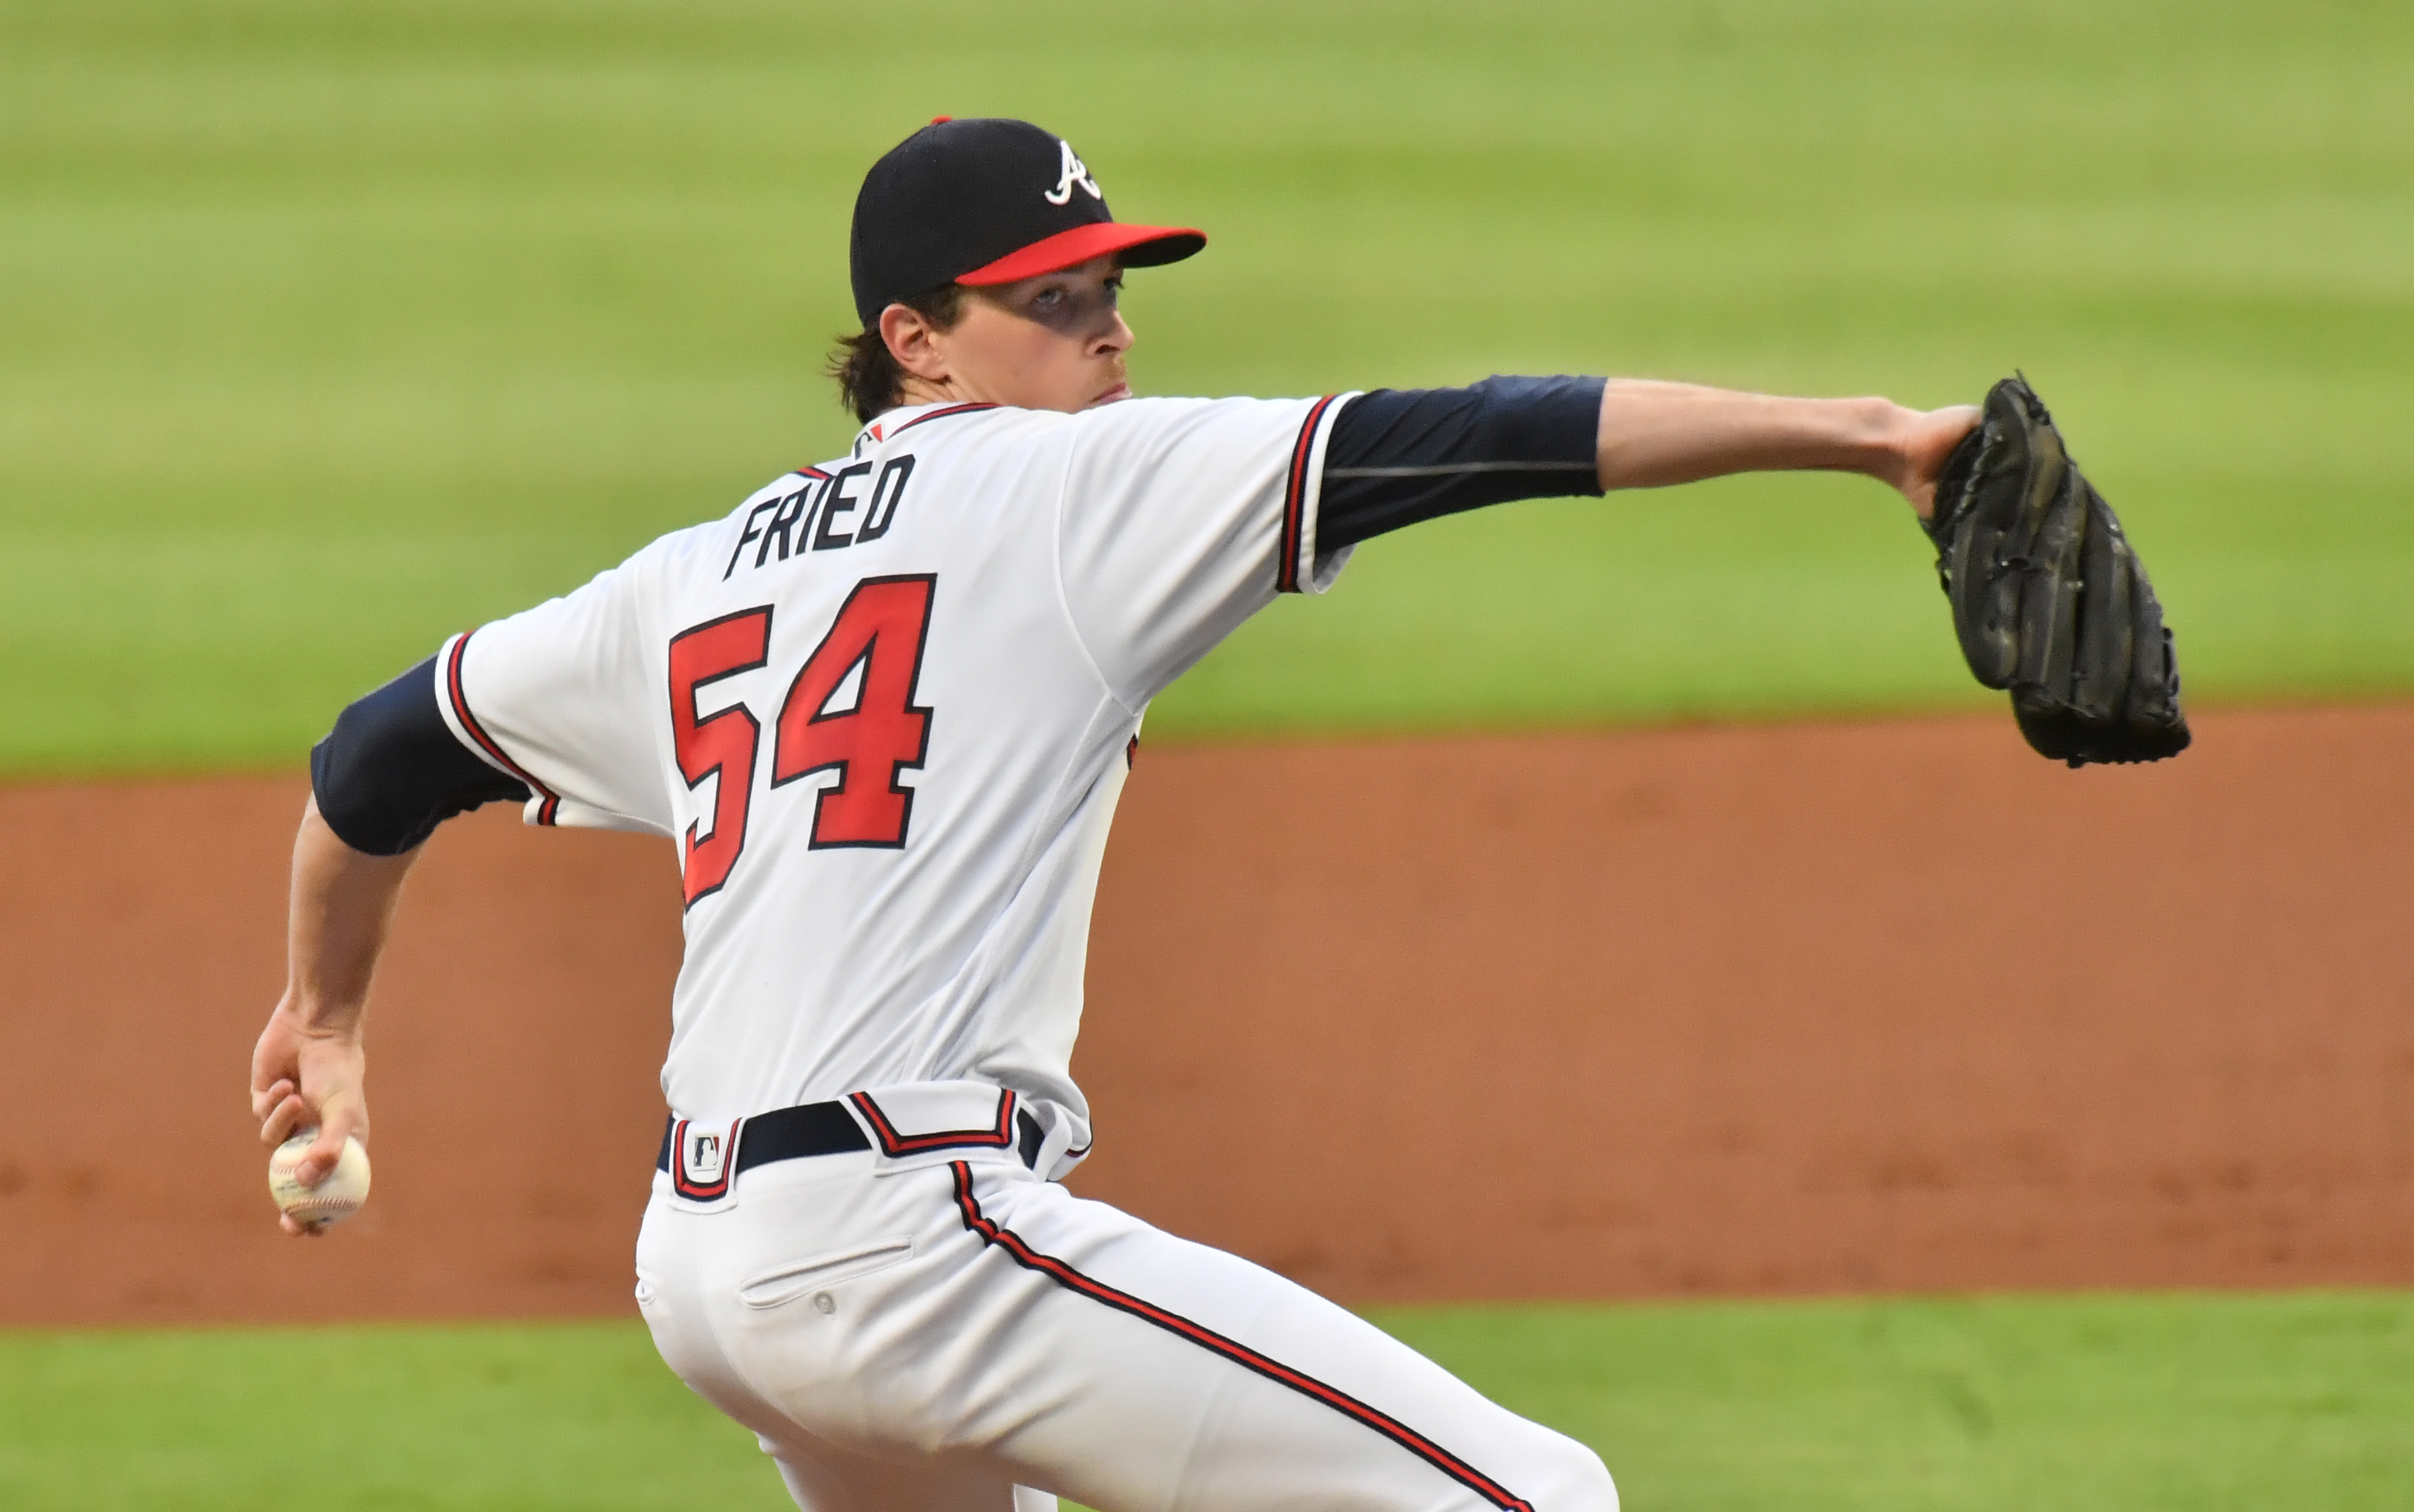 Braves rookies get rotation spots with Wright headed to IL - The